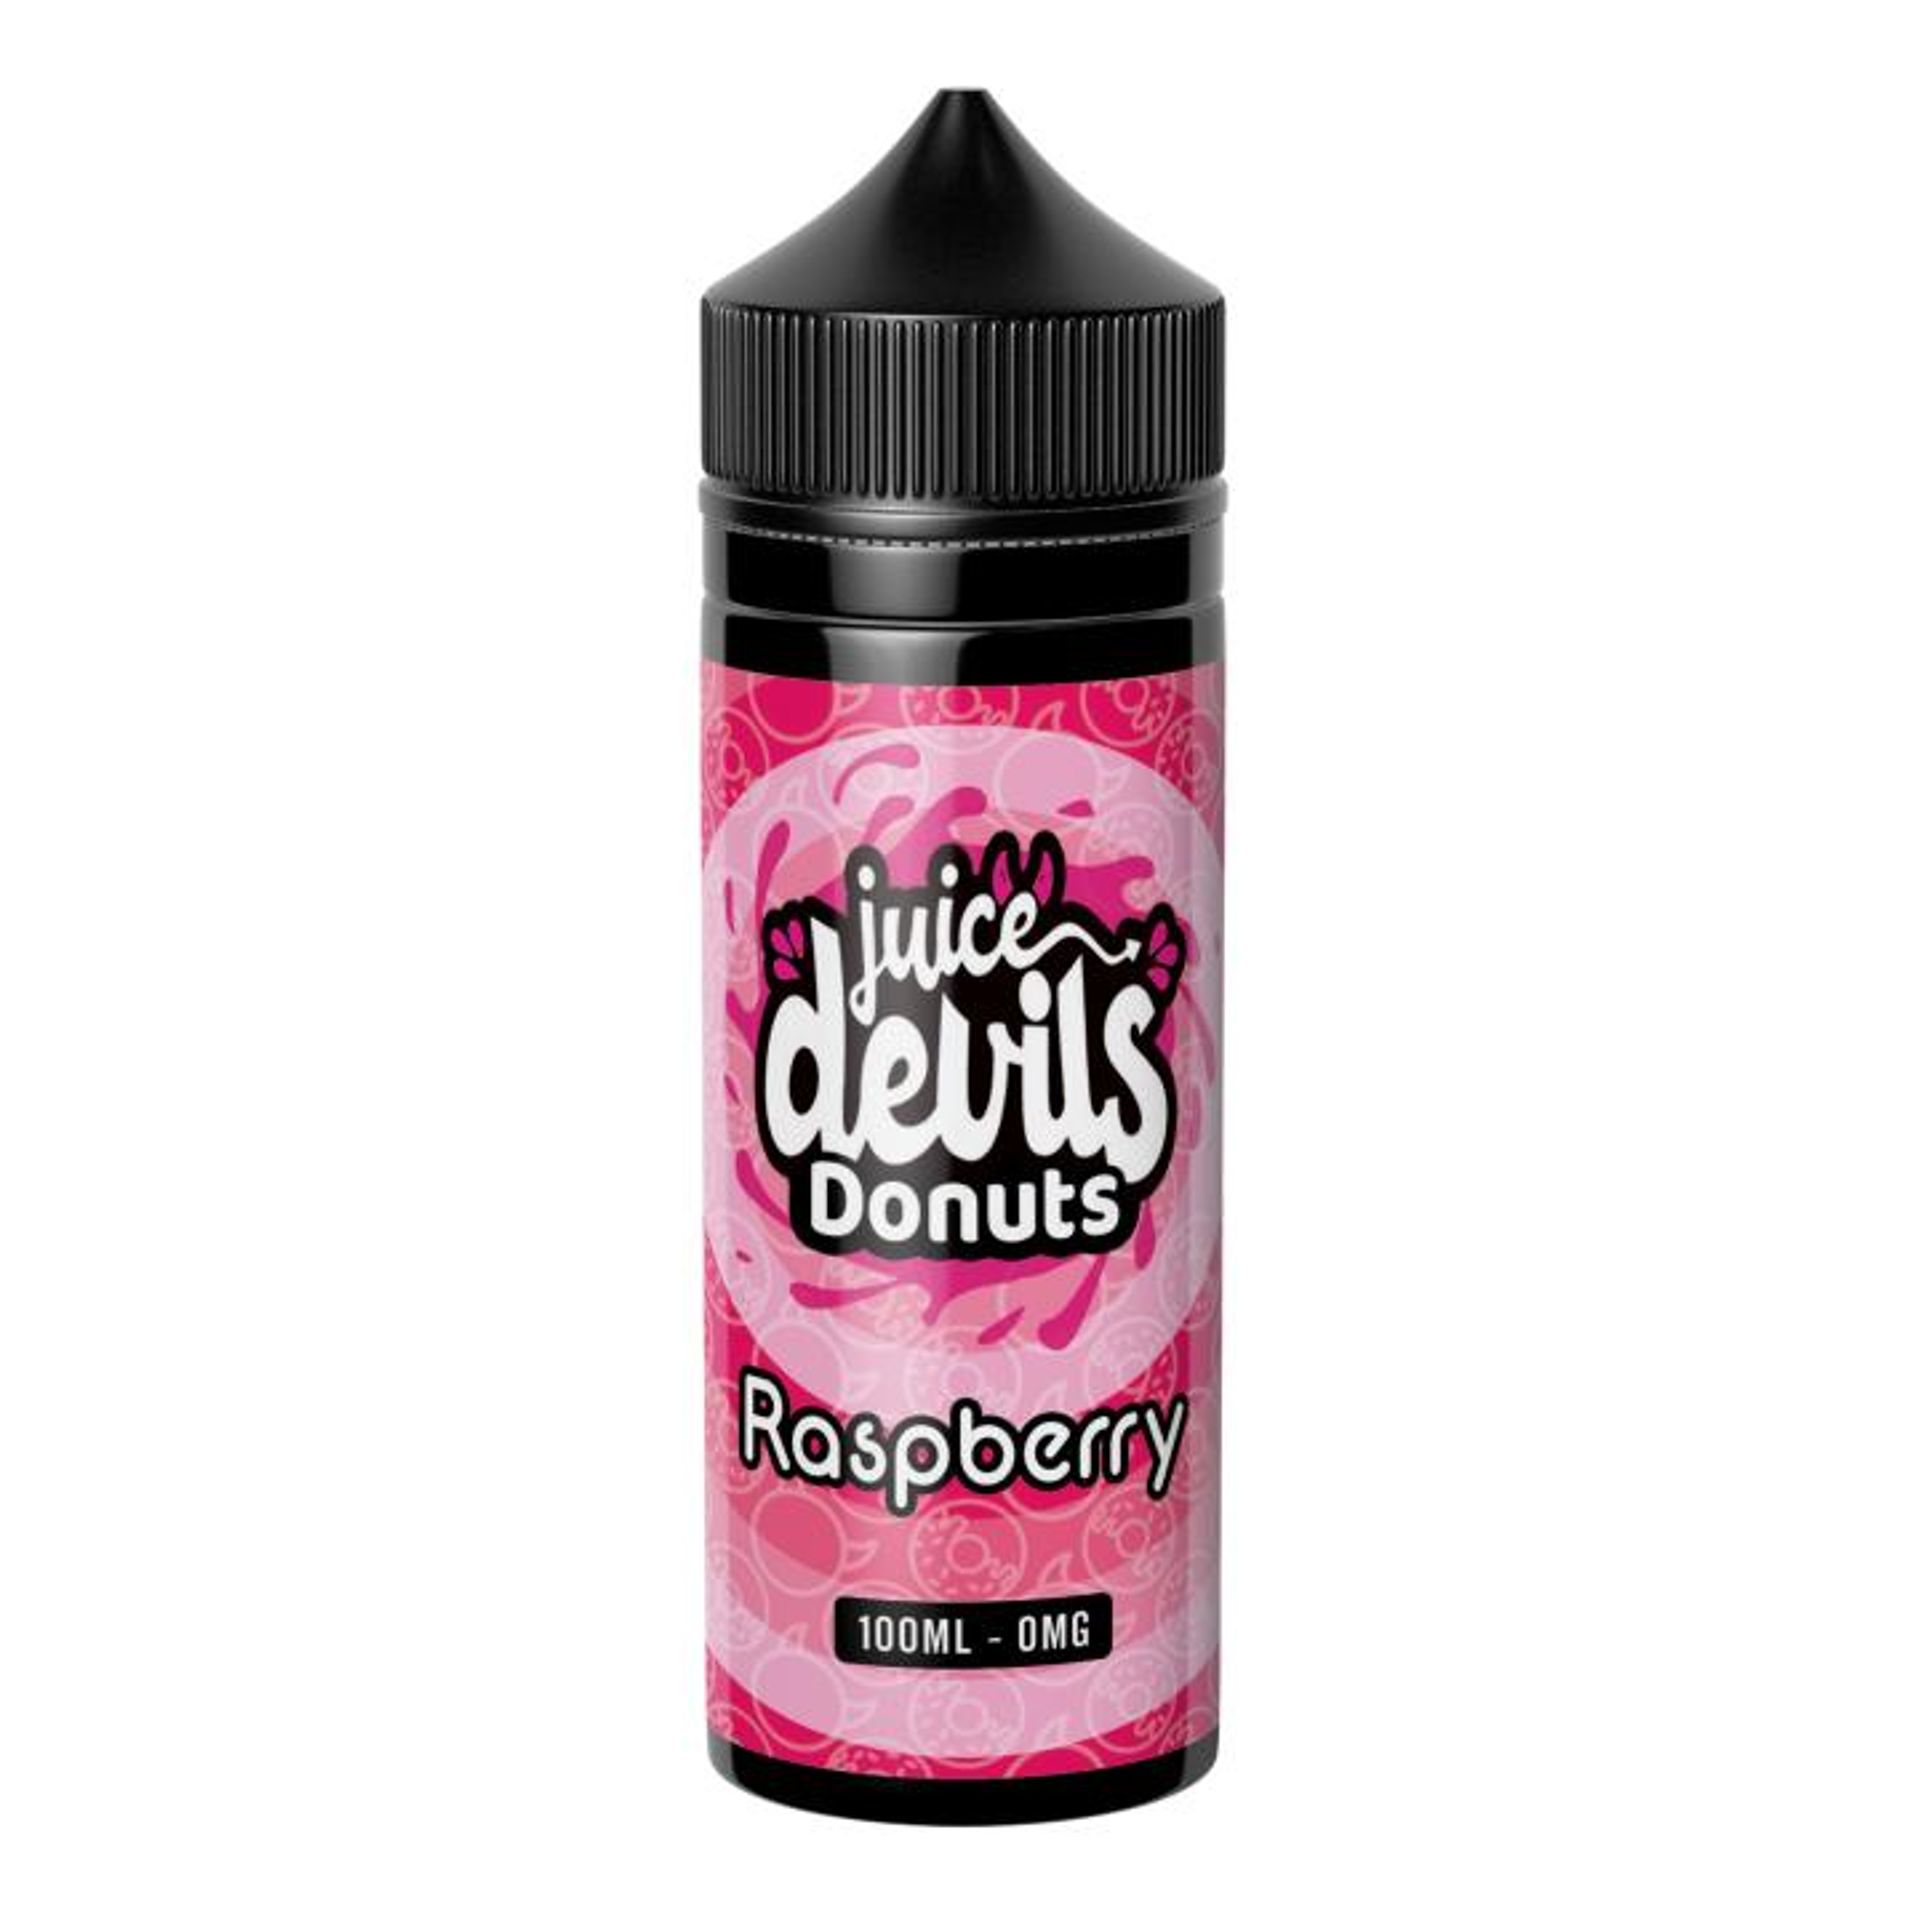 Image of Raspberry Donut by Juice Devils